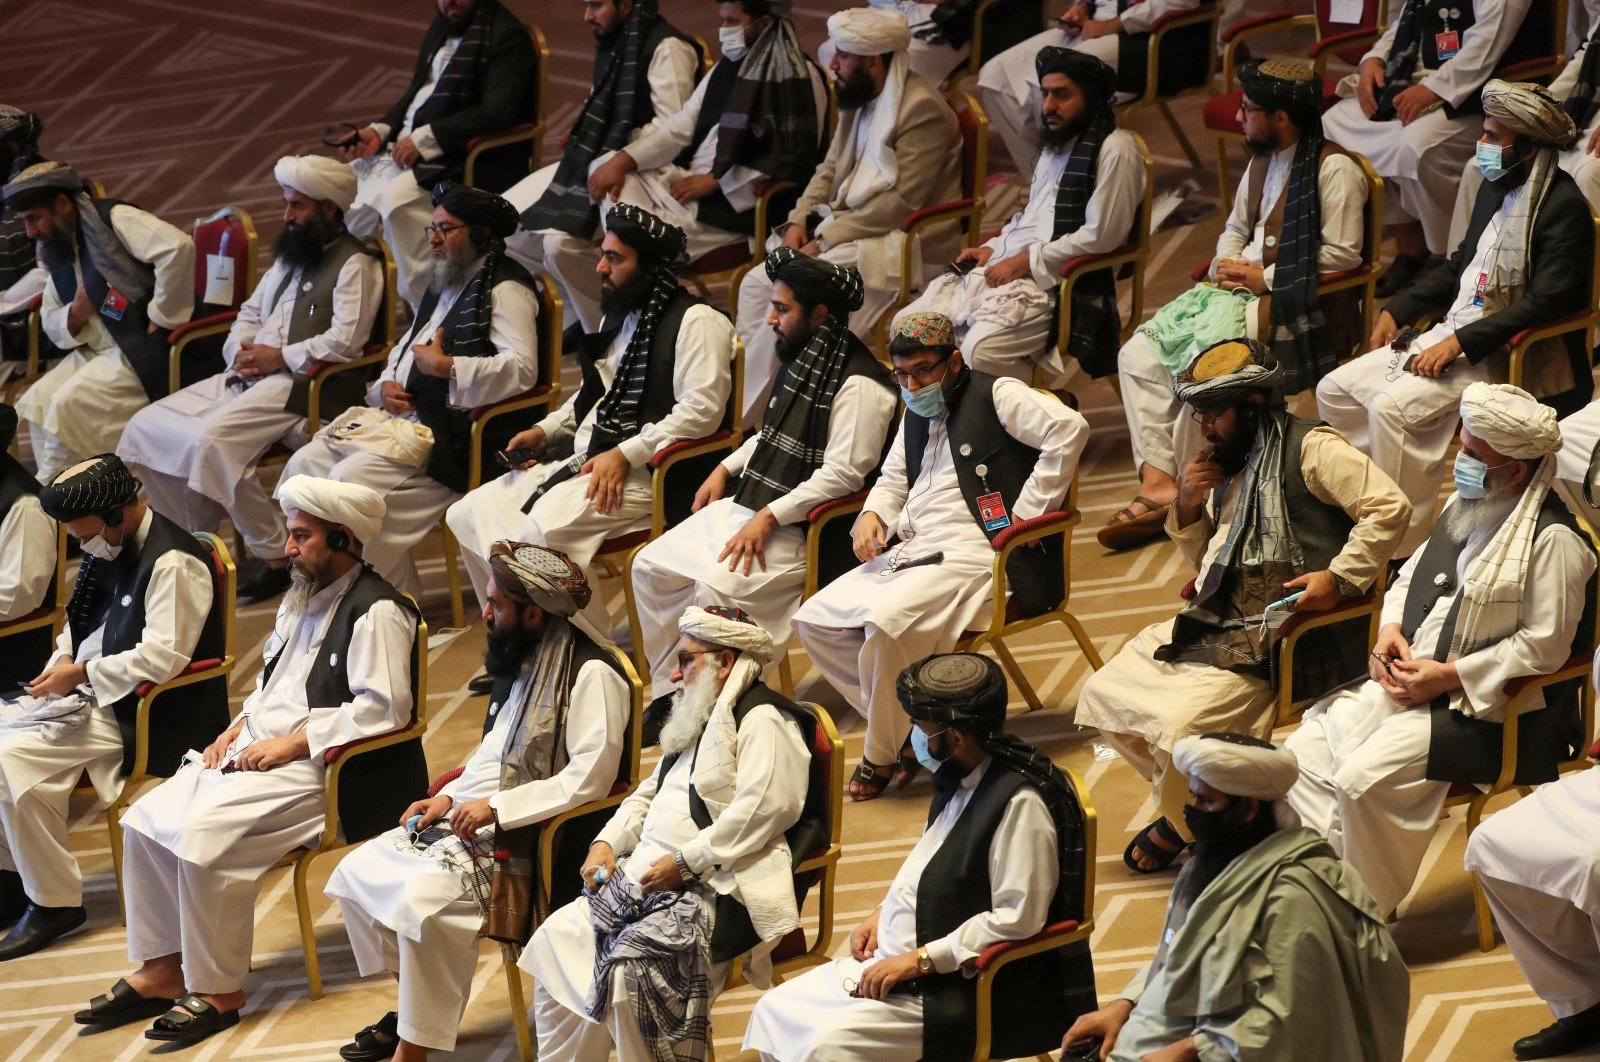 Members of the Taliban delegation attend the opening session of the peace talks between the Afghan government and the Taliban in Doha, Qatar, Sept. 12, 2020. (AFP Photo)